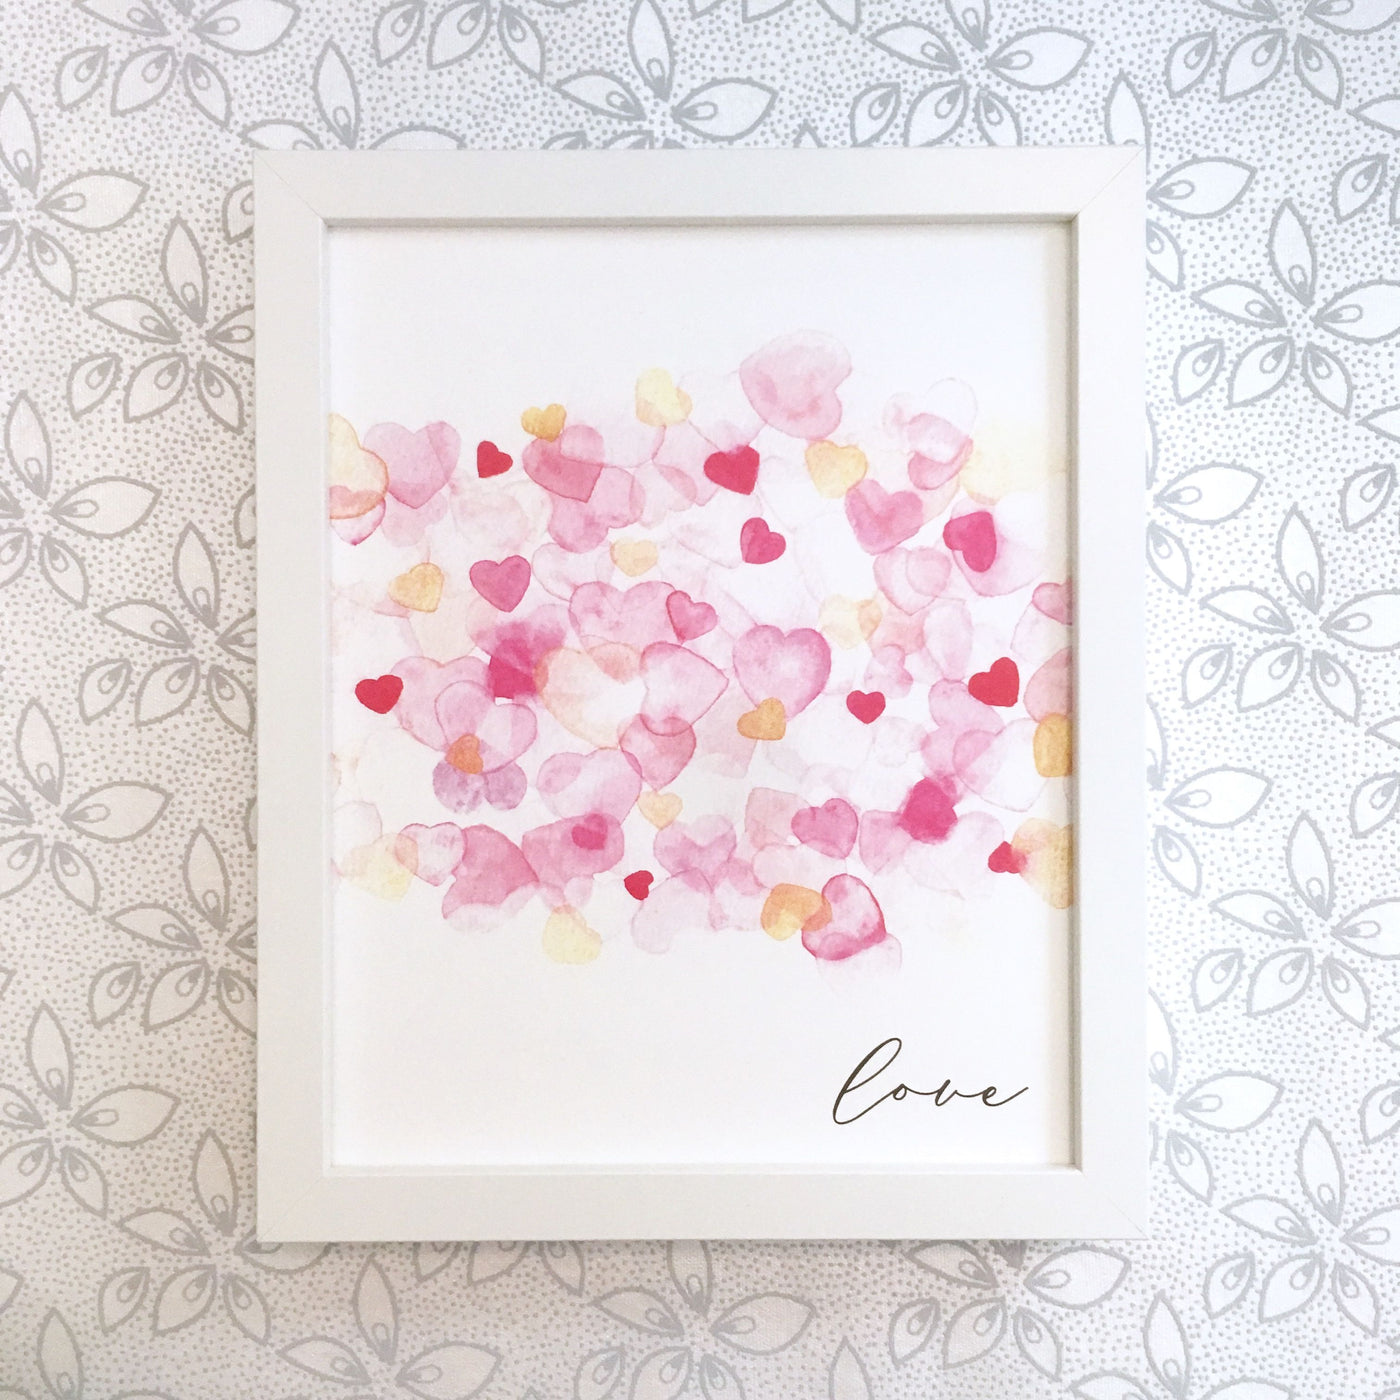 Love Bubbles Art Print - Matted or Framed